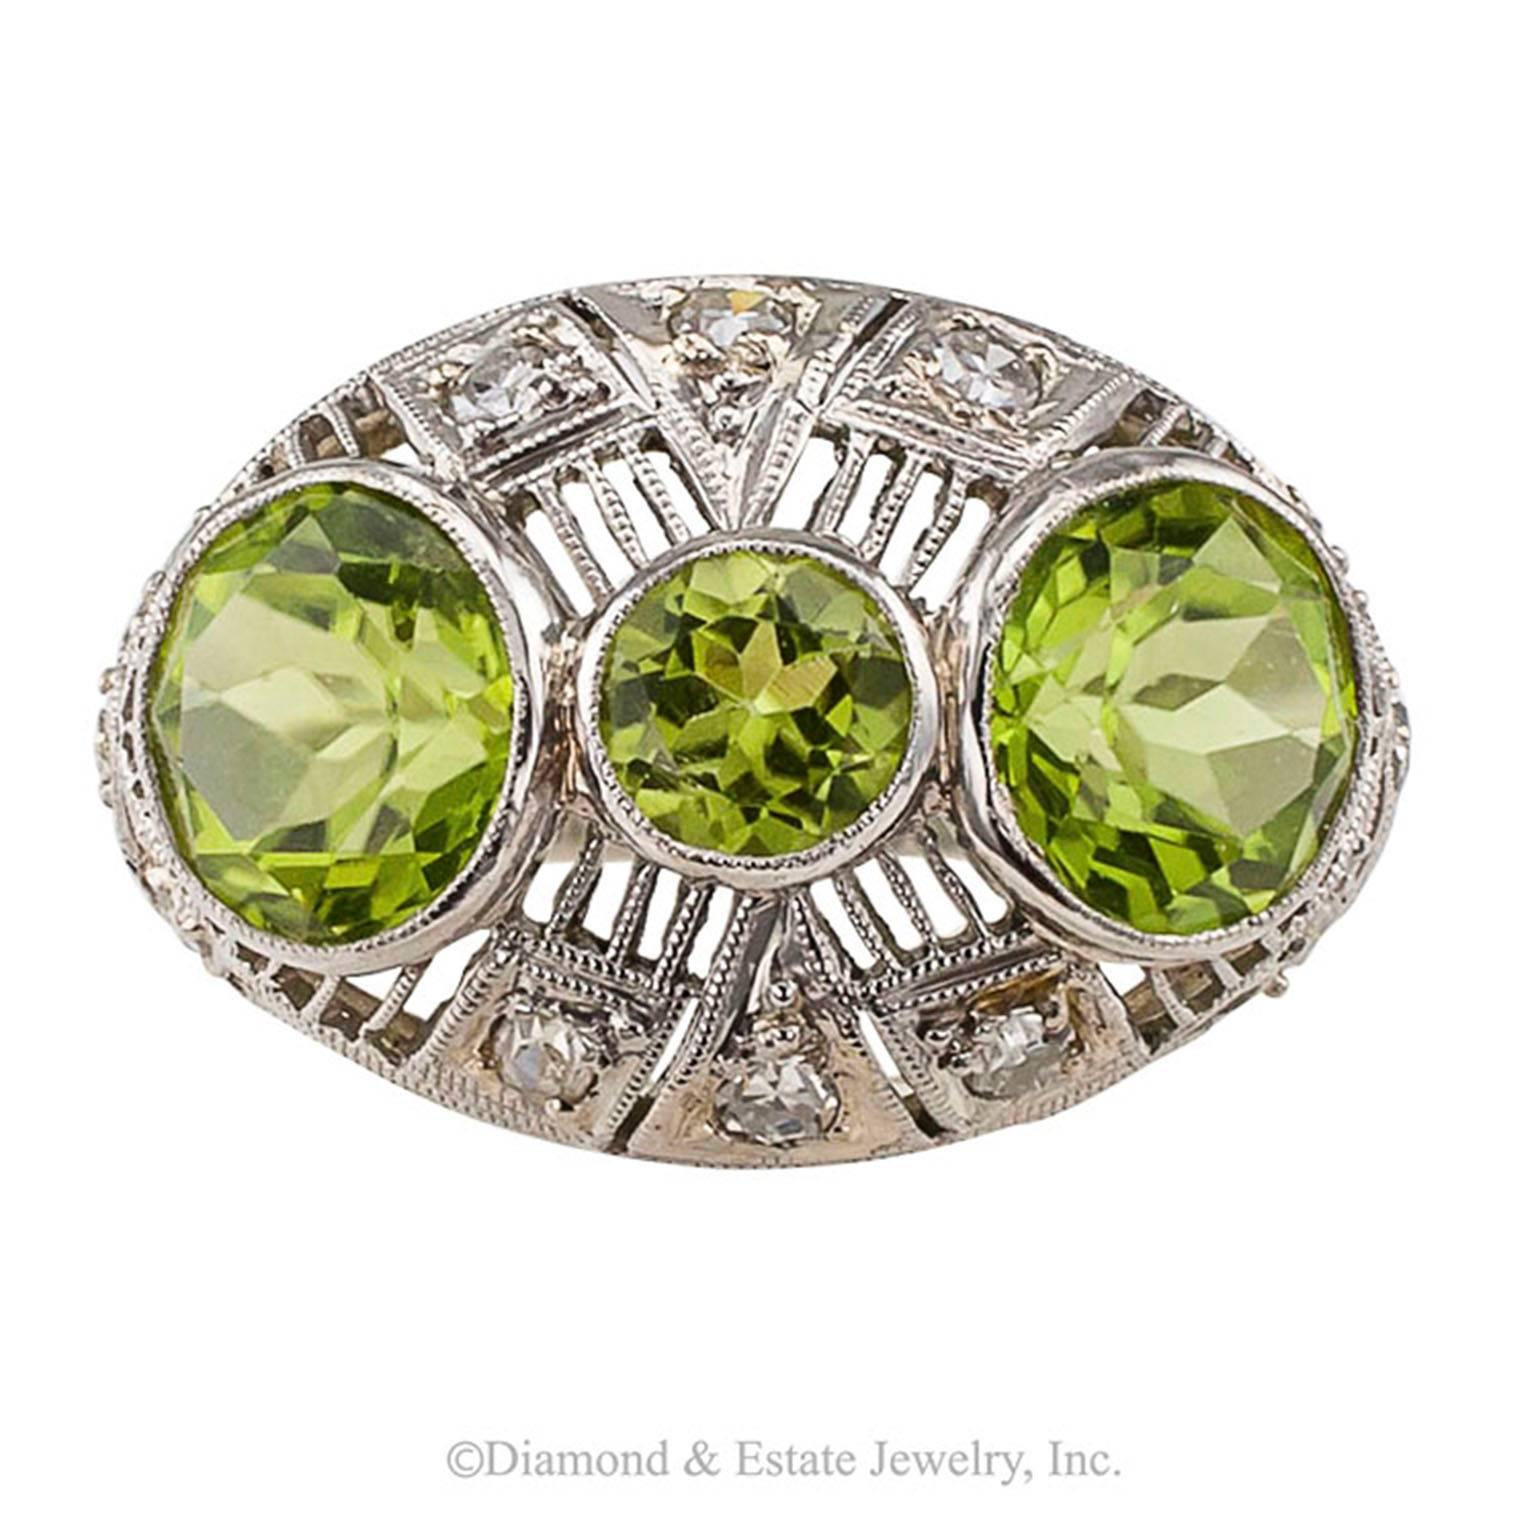 Art Deco Peridot Diamond Platinum Ring

Art Deco peridot and diamond domed platinum ring circa 1925.  Intensive filigree and millegrain decorate the slightly domed design set with three vibrant round peridot framed by a geometric arrangement of